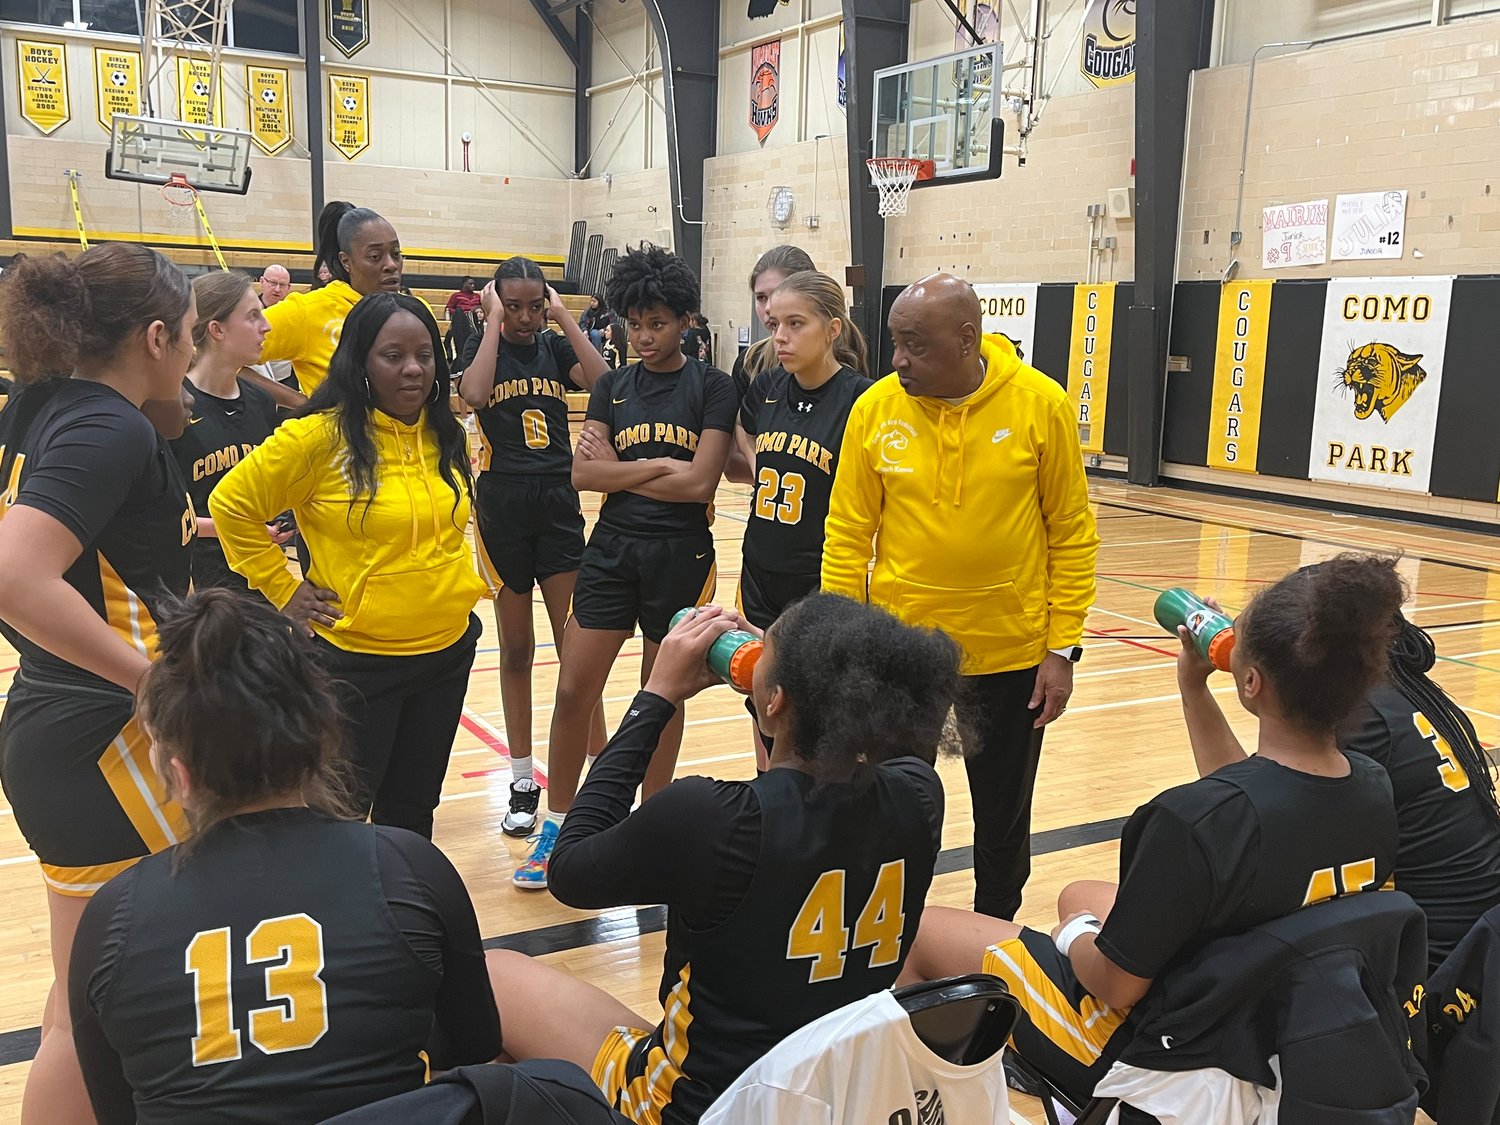 A focused effort by the Como girls’ basketball team resulted in a 88-63 victory over Central and extended the program’s conference remarkable winning streak. (Photo by Eric Erickson)